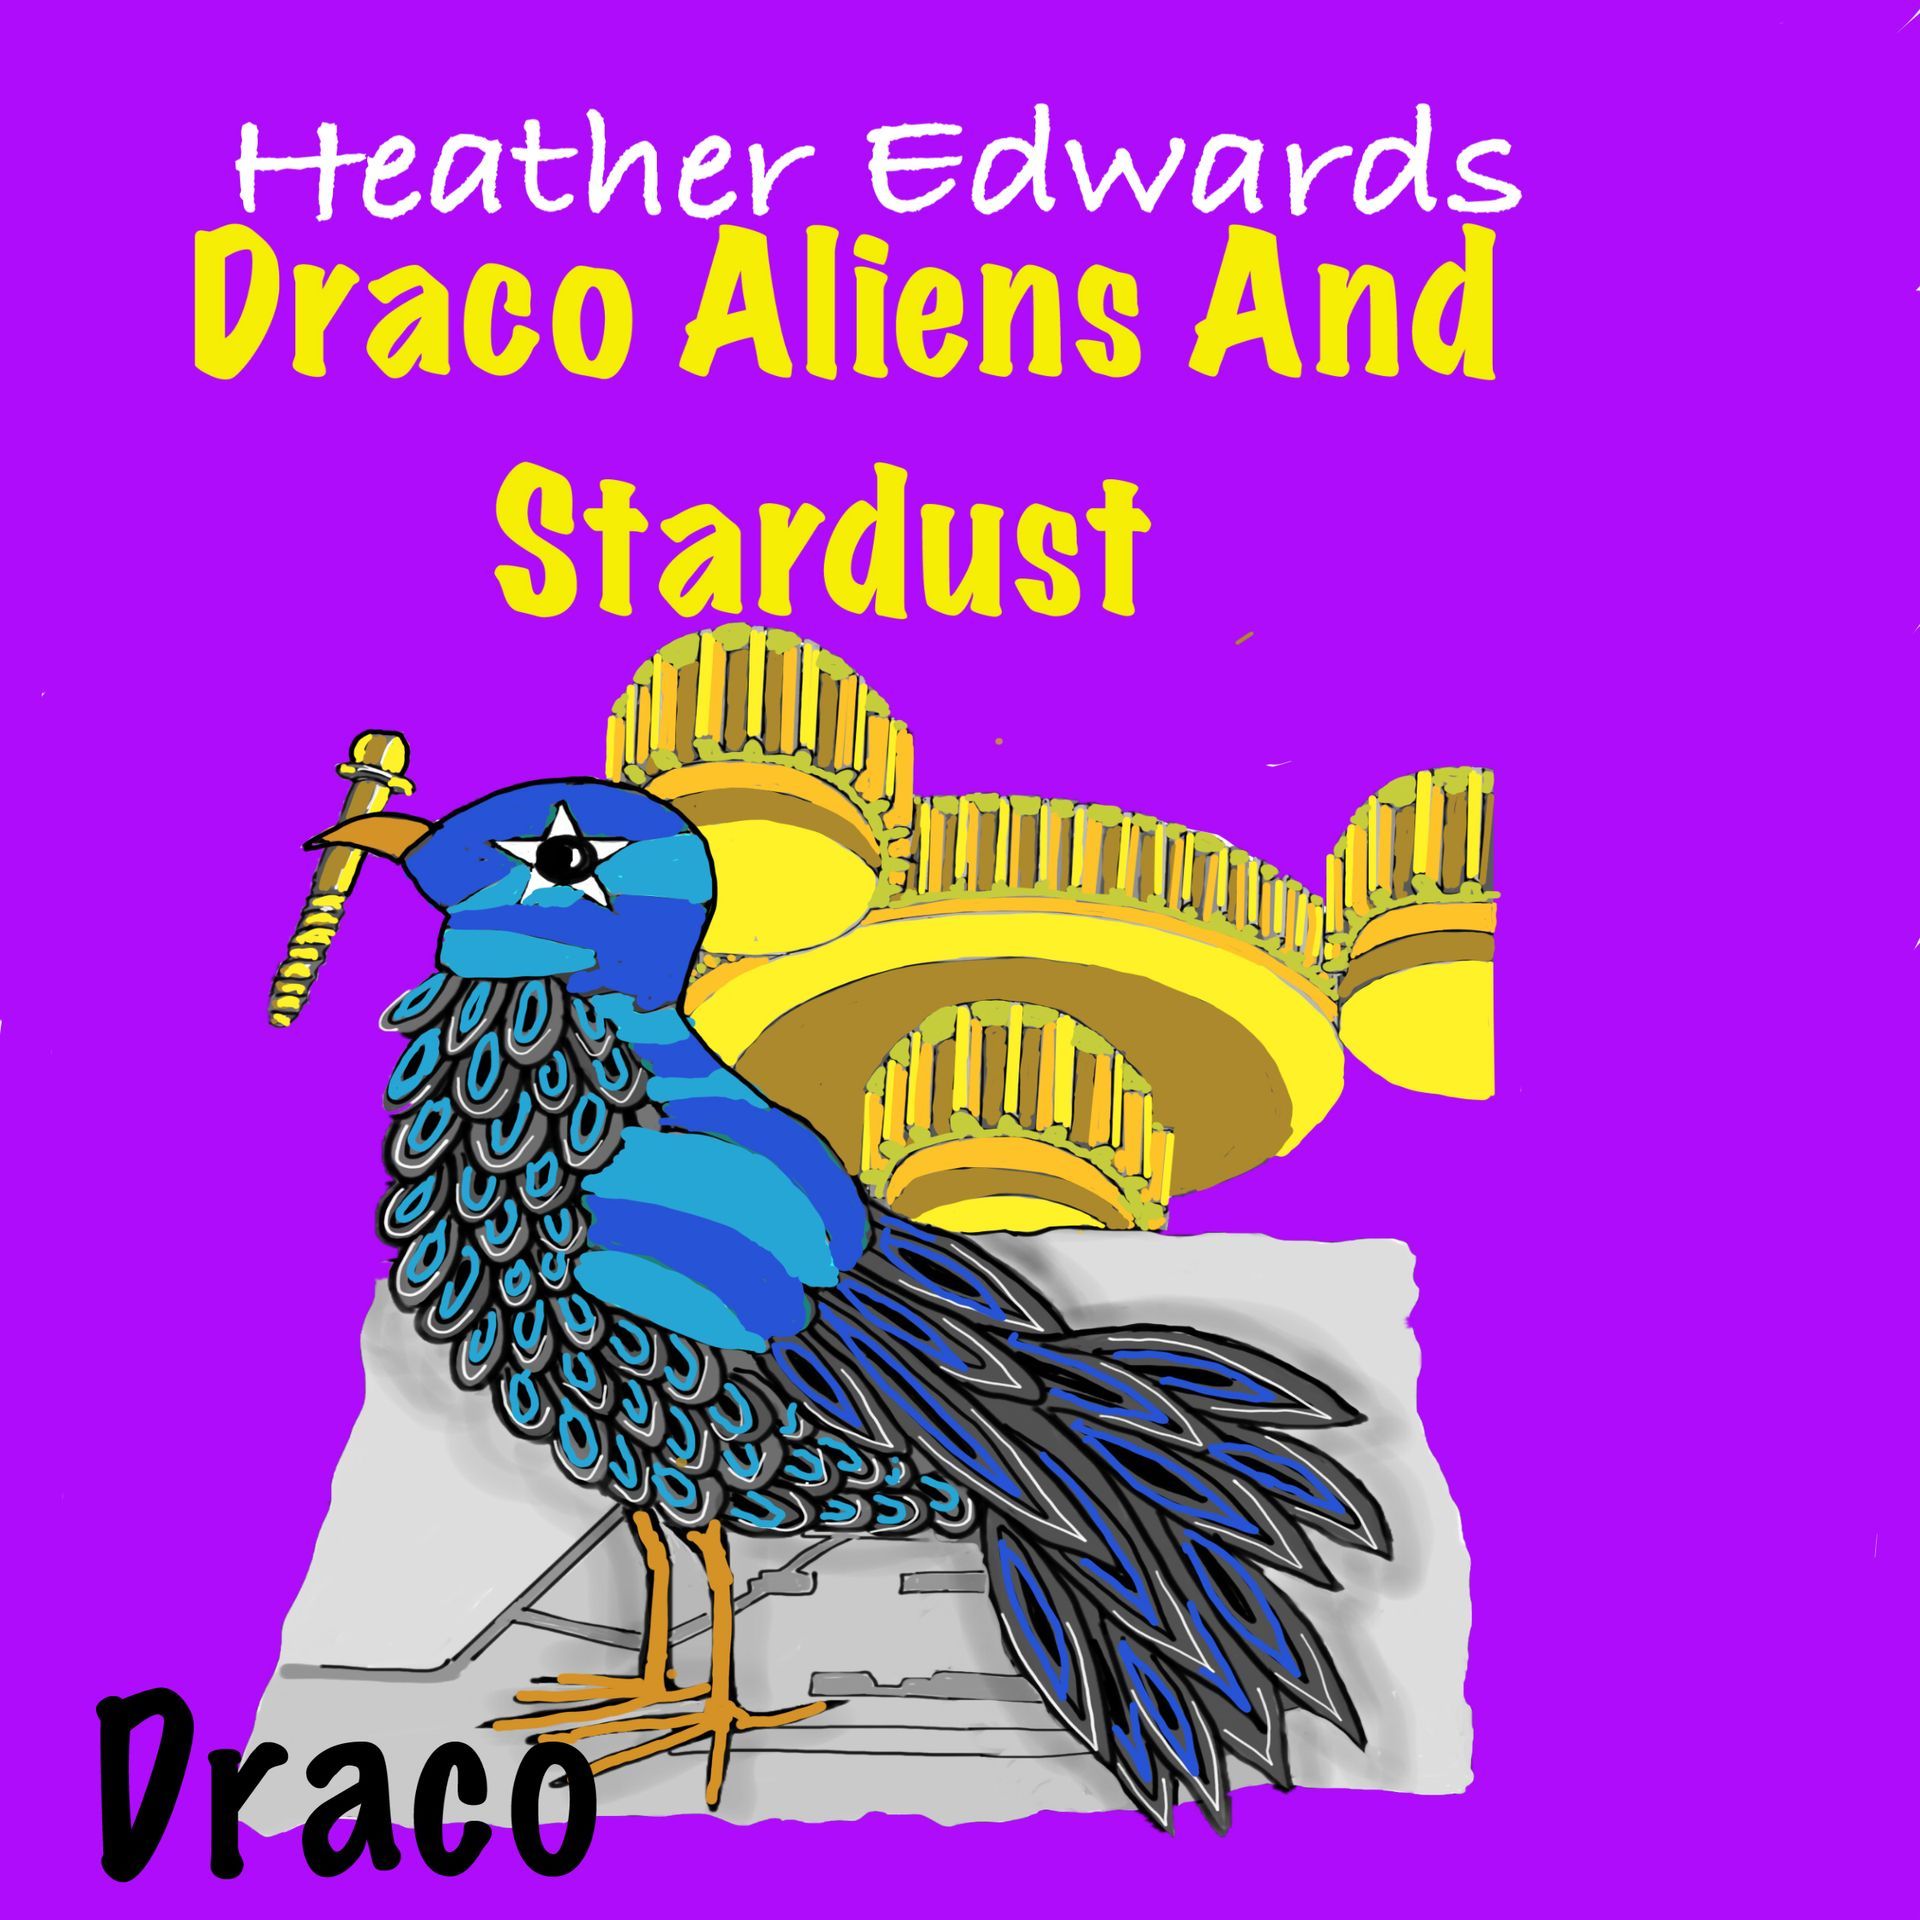 Draco Aliens and Stardust Audio Heather Edwards